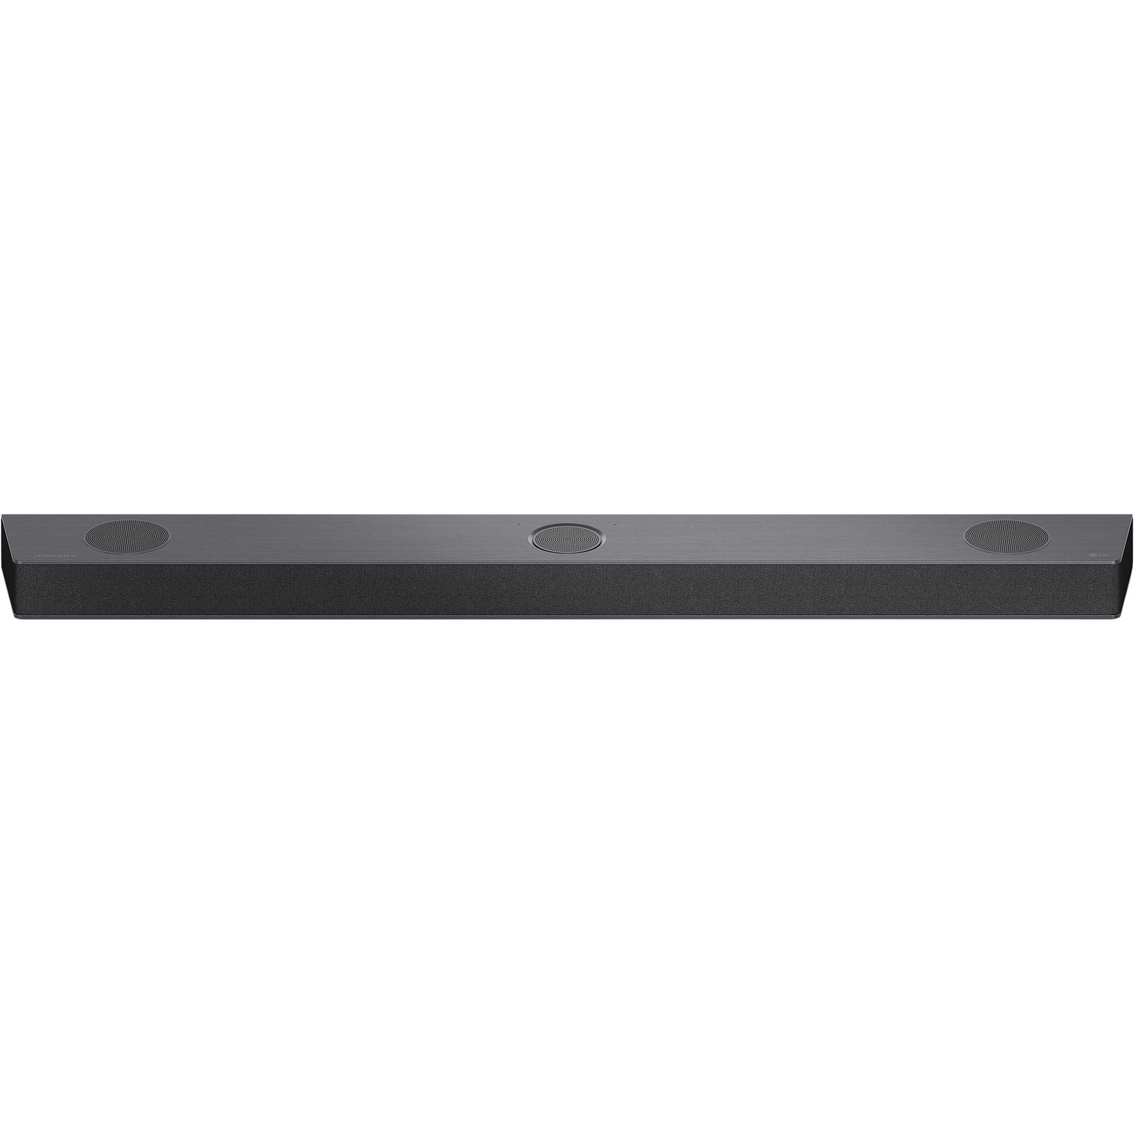 LG S95QR 9.1.5 Ch. 810W High Res Audio Sound Bar and Rear Surround Speakers - Image 4 of 10